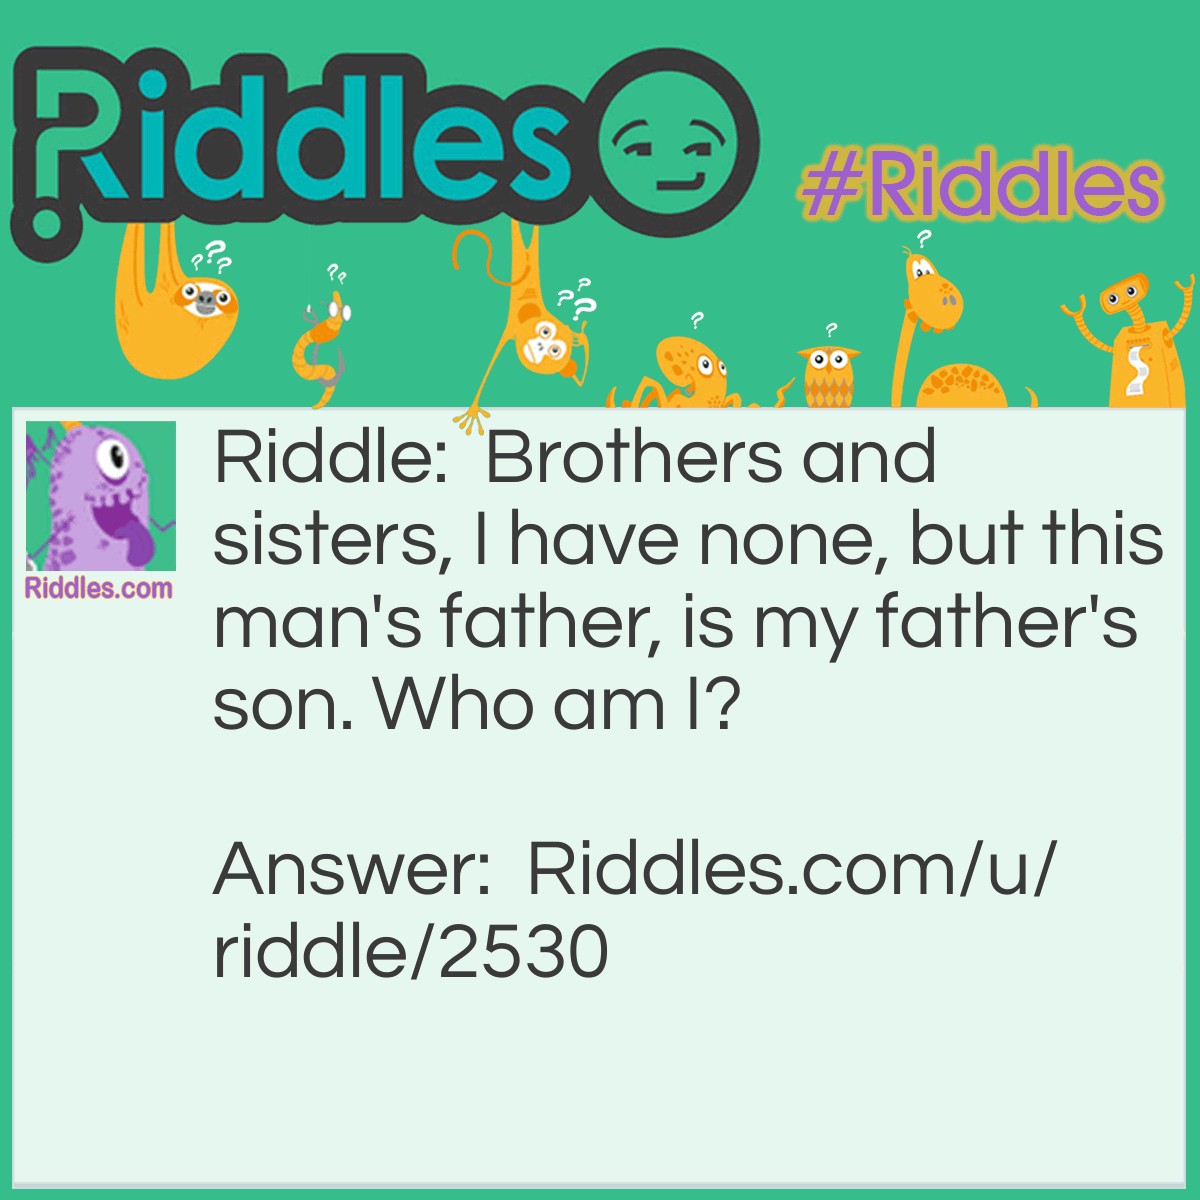 Riddle: Brothers and sisters, I have none, but this man's father, is my father's son. Who am I? Answer: Your son!